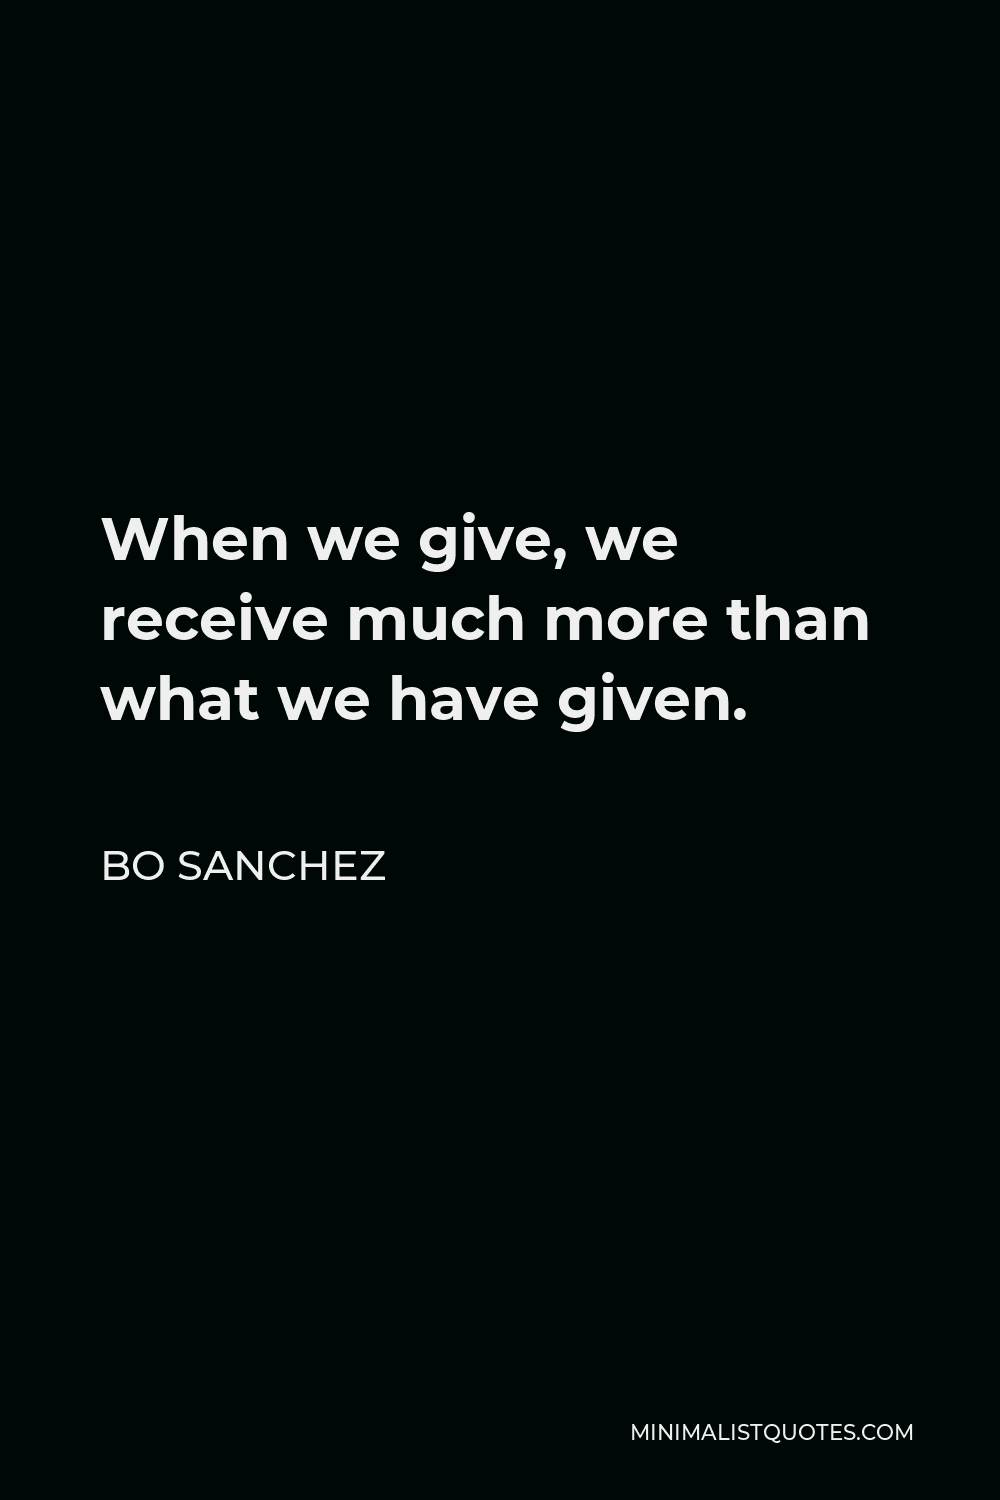 Bo Sanchez Quote - When we give, we receive much more than what we have given.